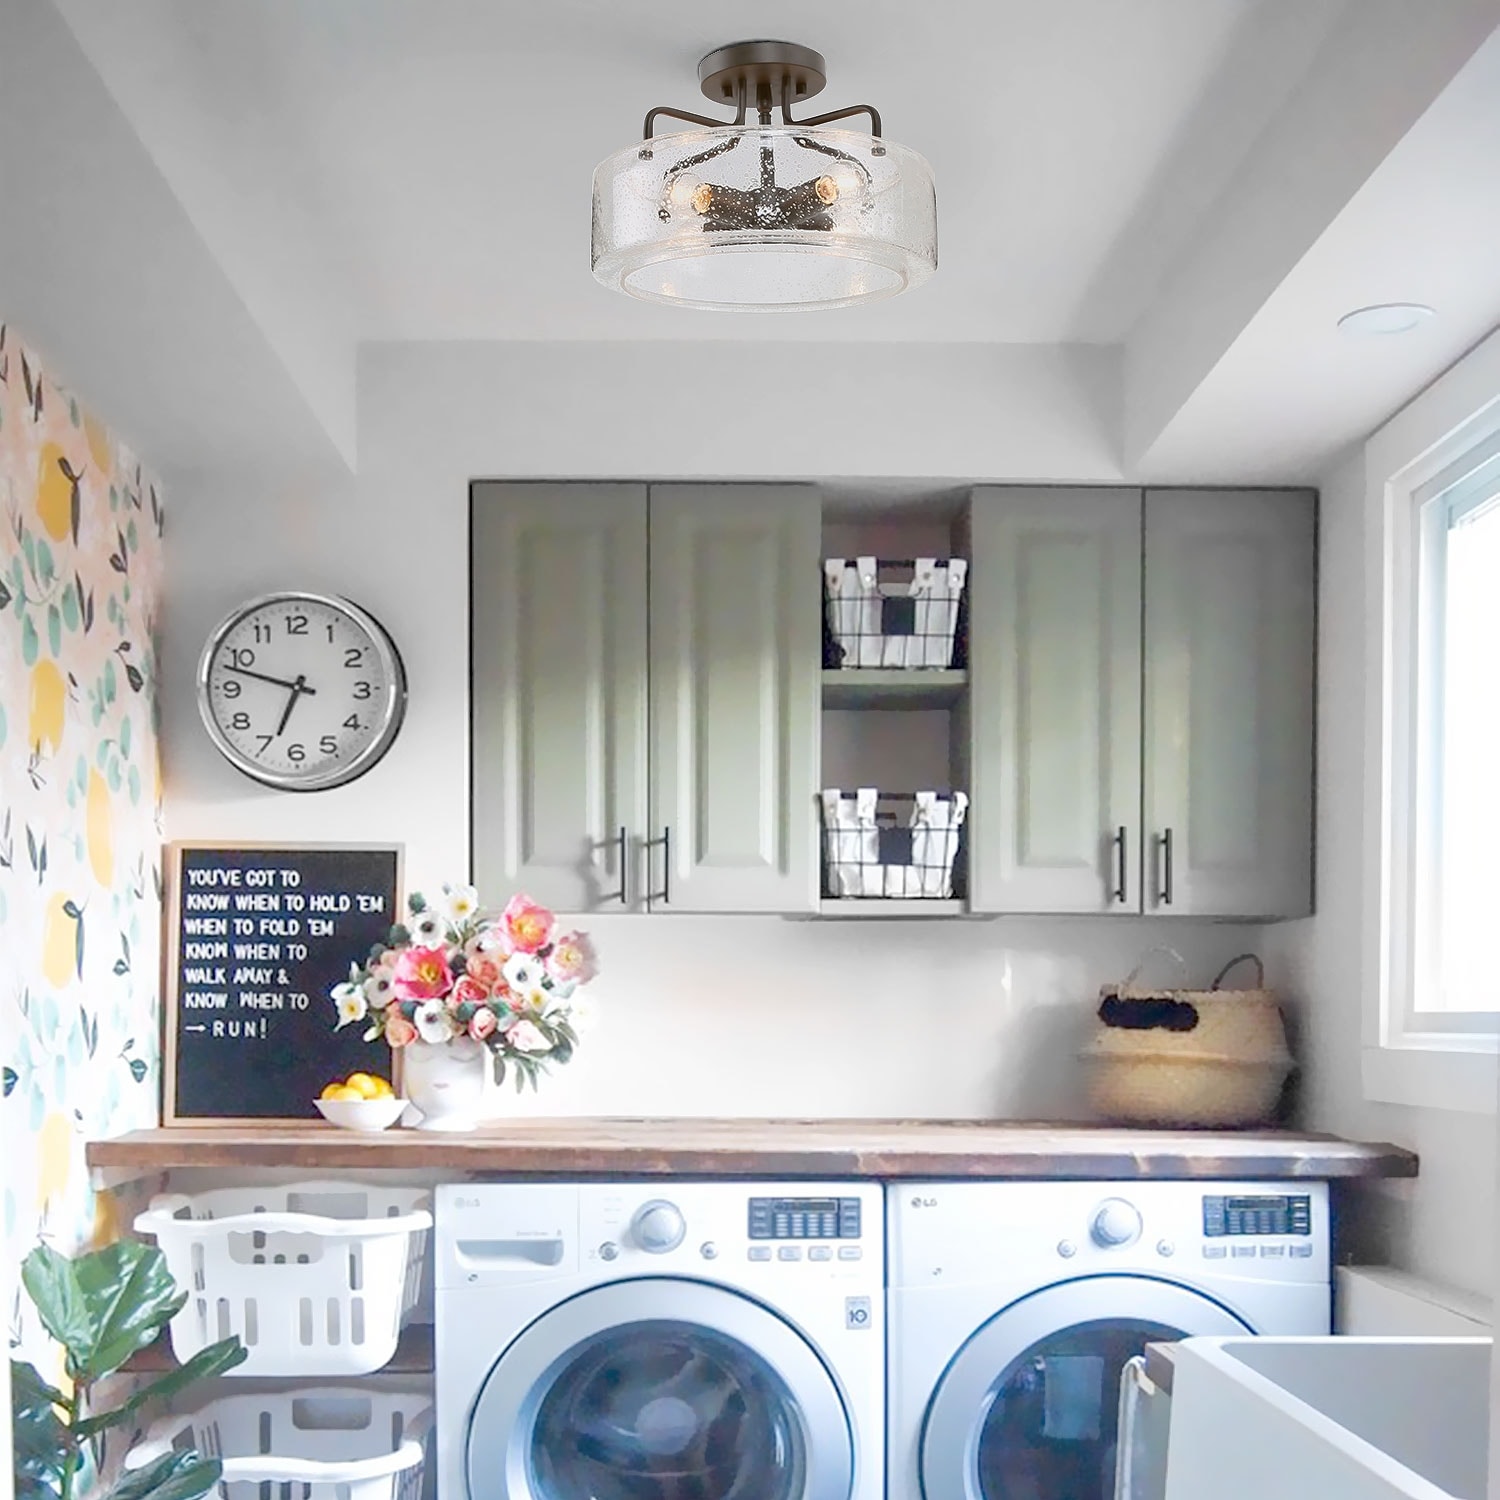 Best Ceiling Light Fixture For Laundry Room : Ceiling Lighting At The ...